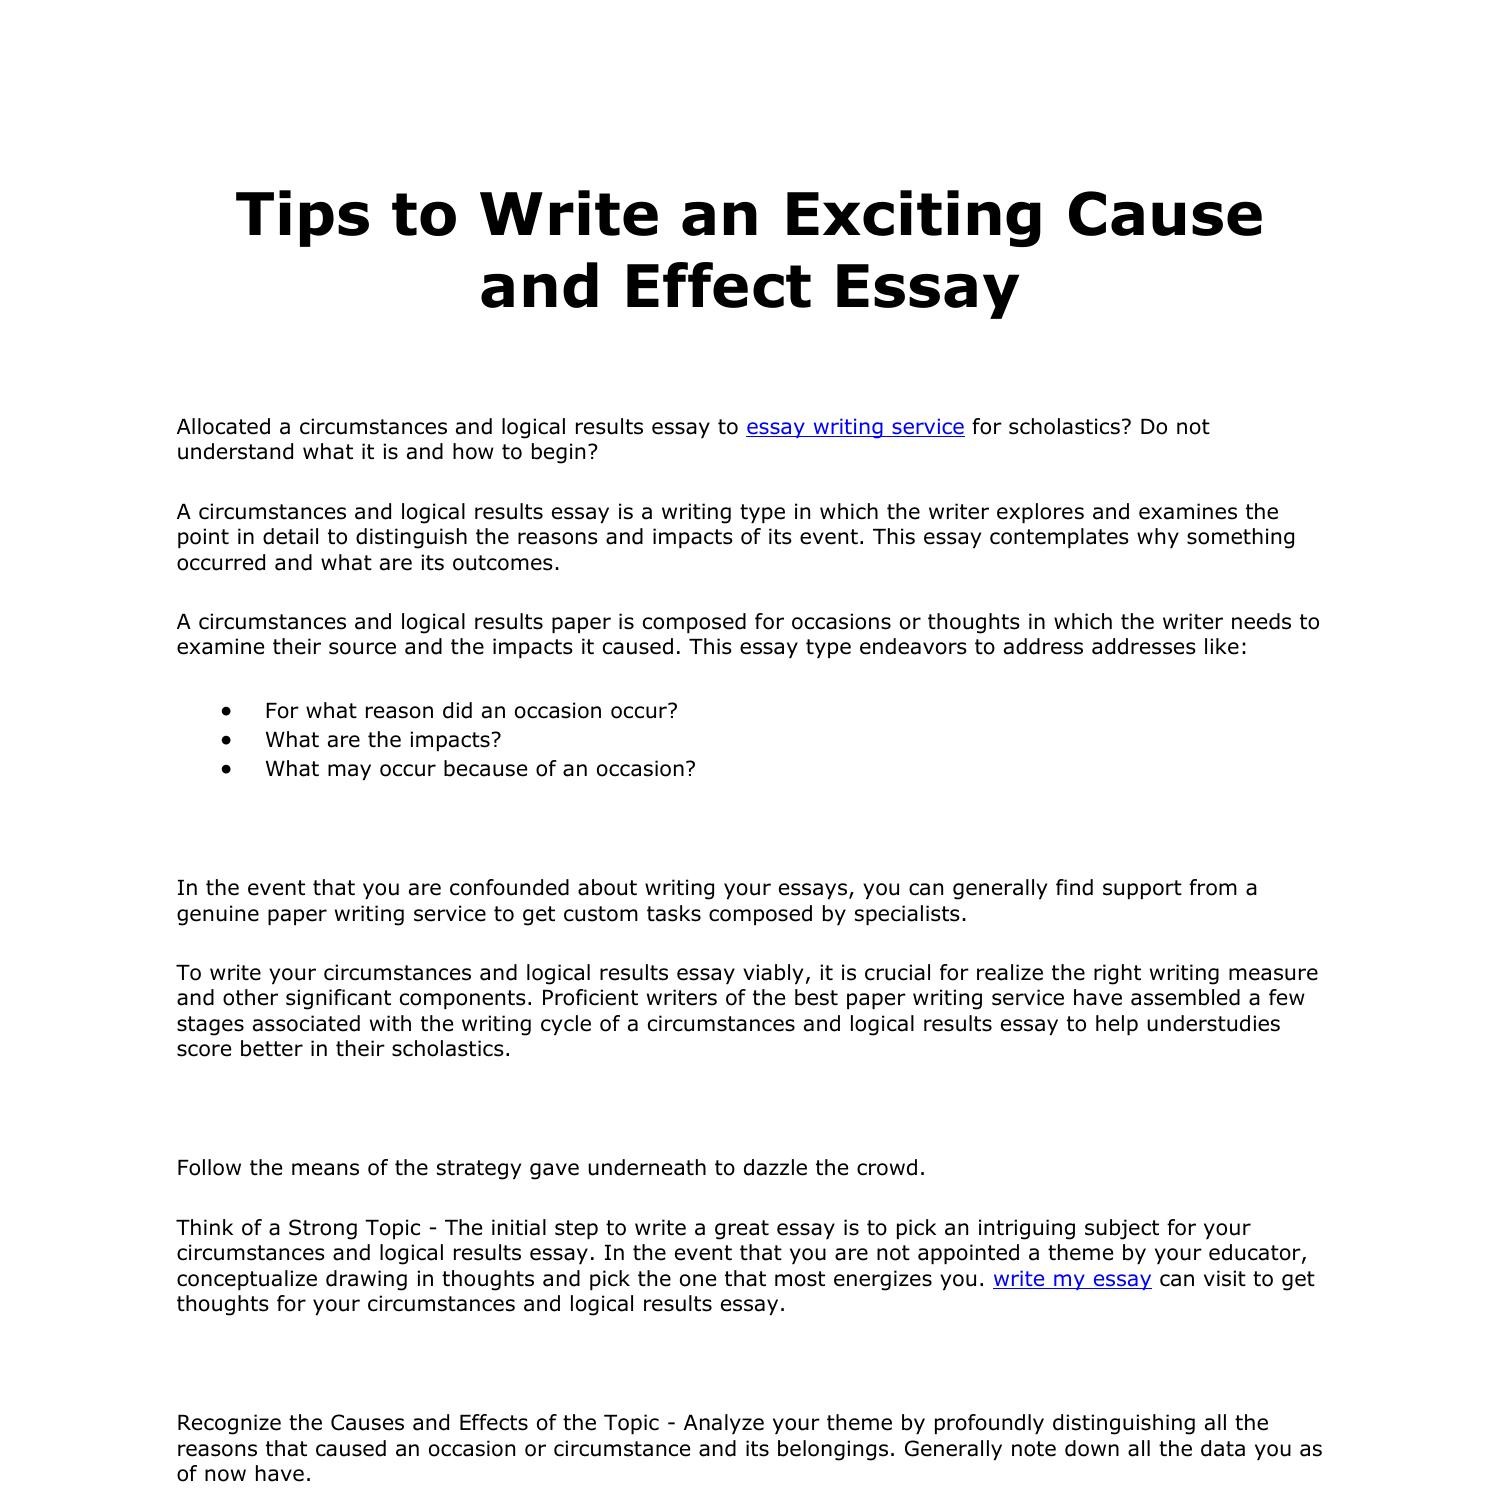 how to write an essay on effects